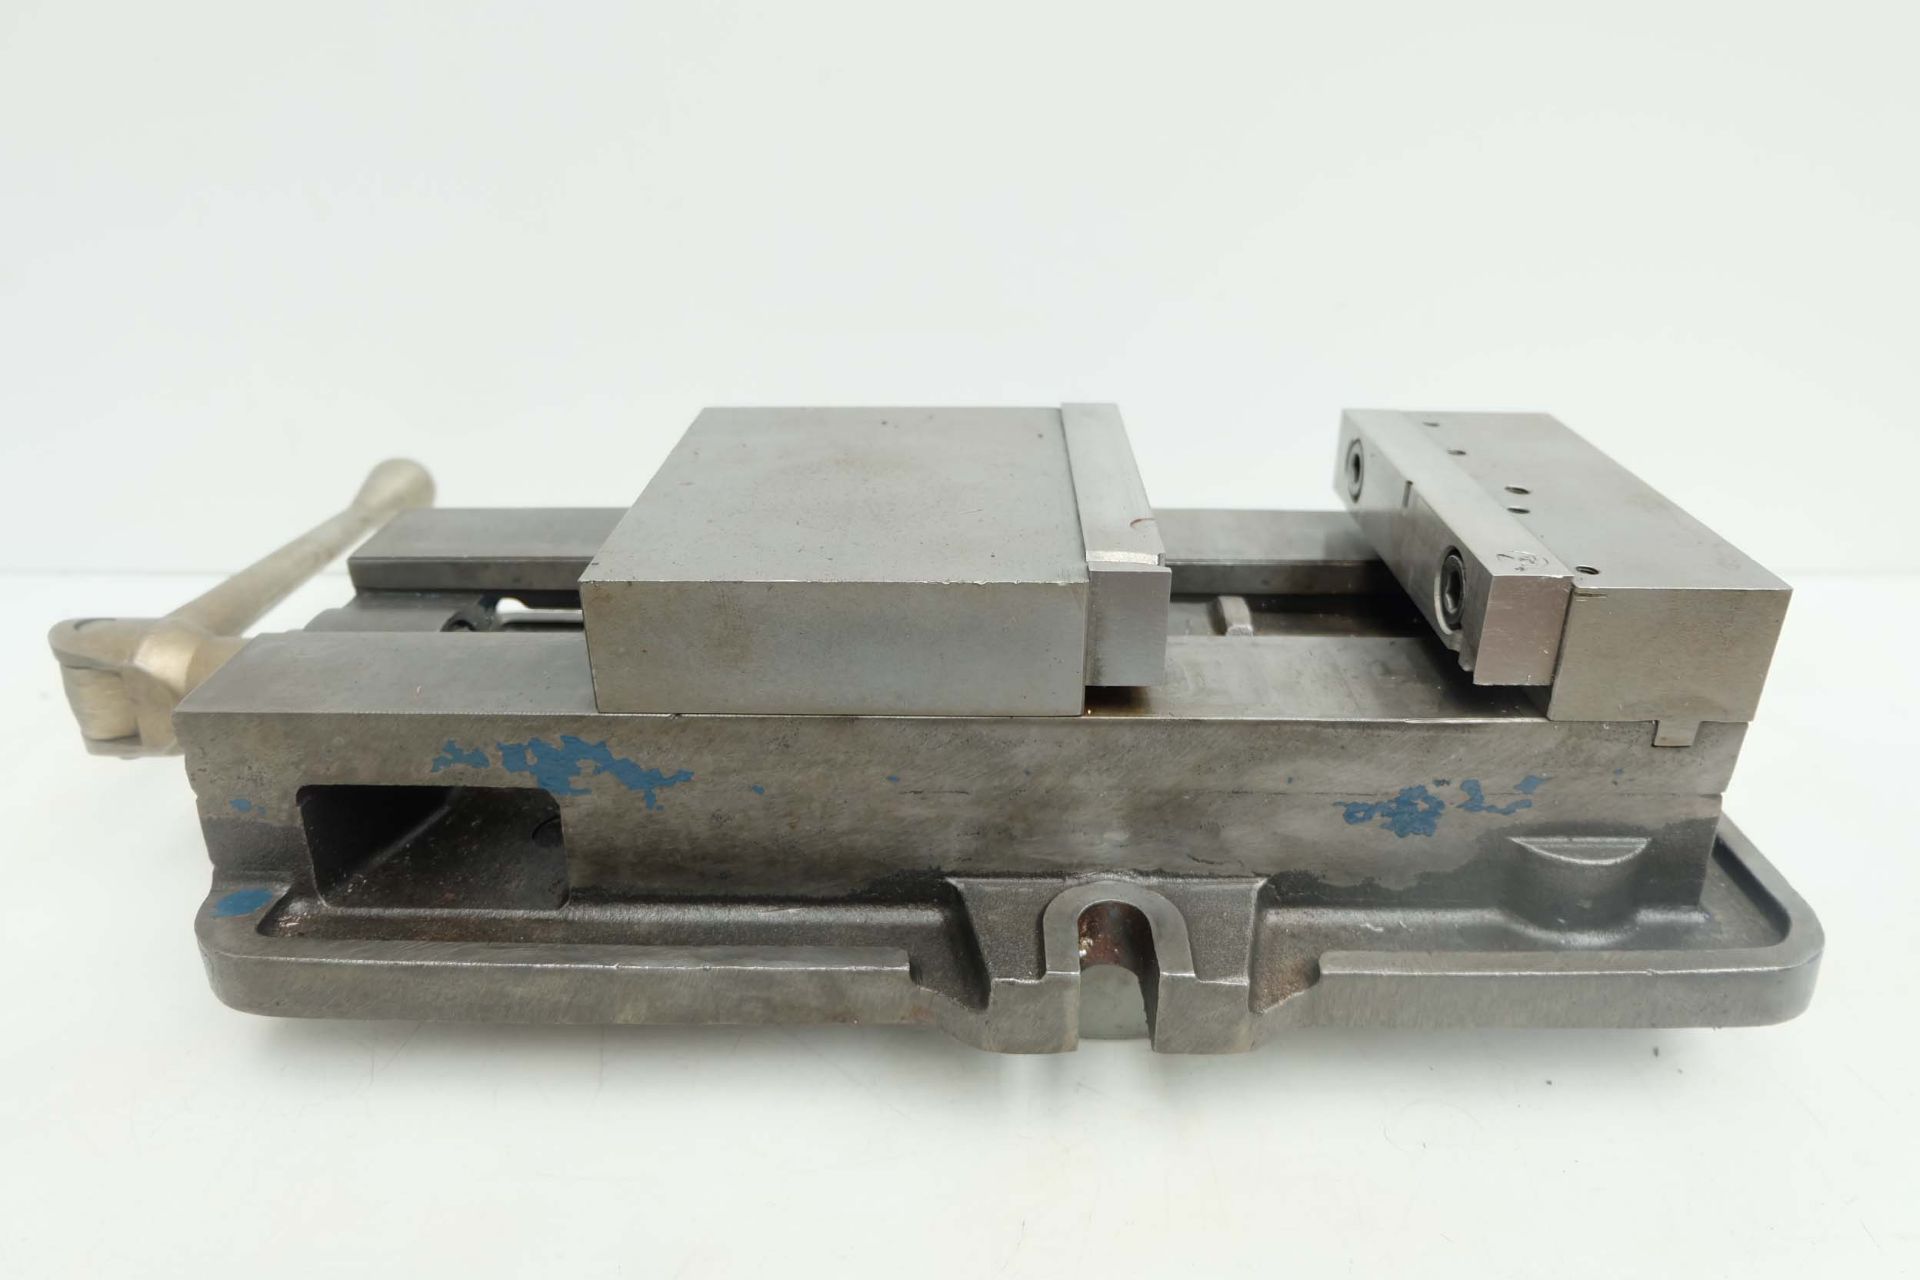 Autowell Model ATW 675A Machine Vice With Integrated Pull Down Mechanism. Width of Vice 6". - Image 6 of 6